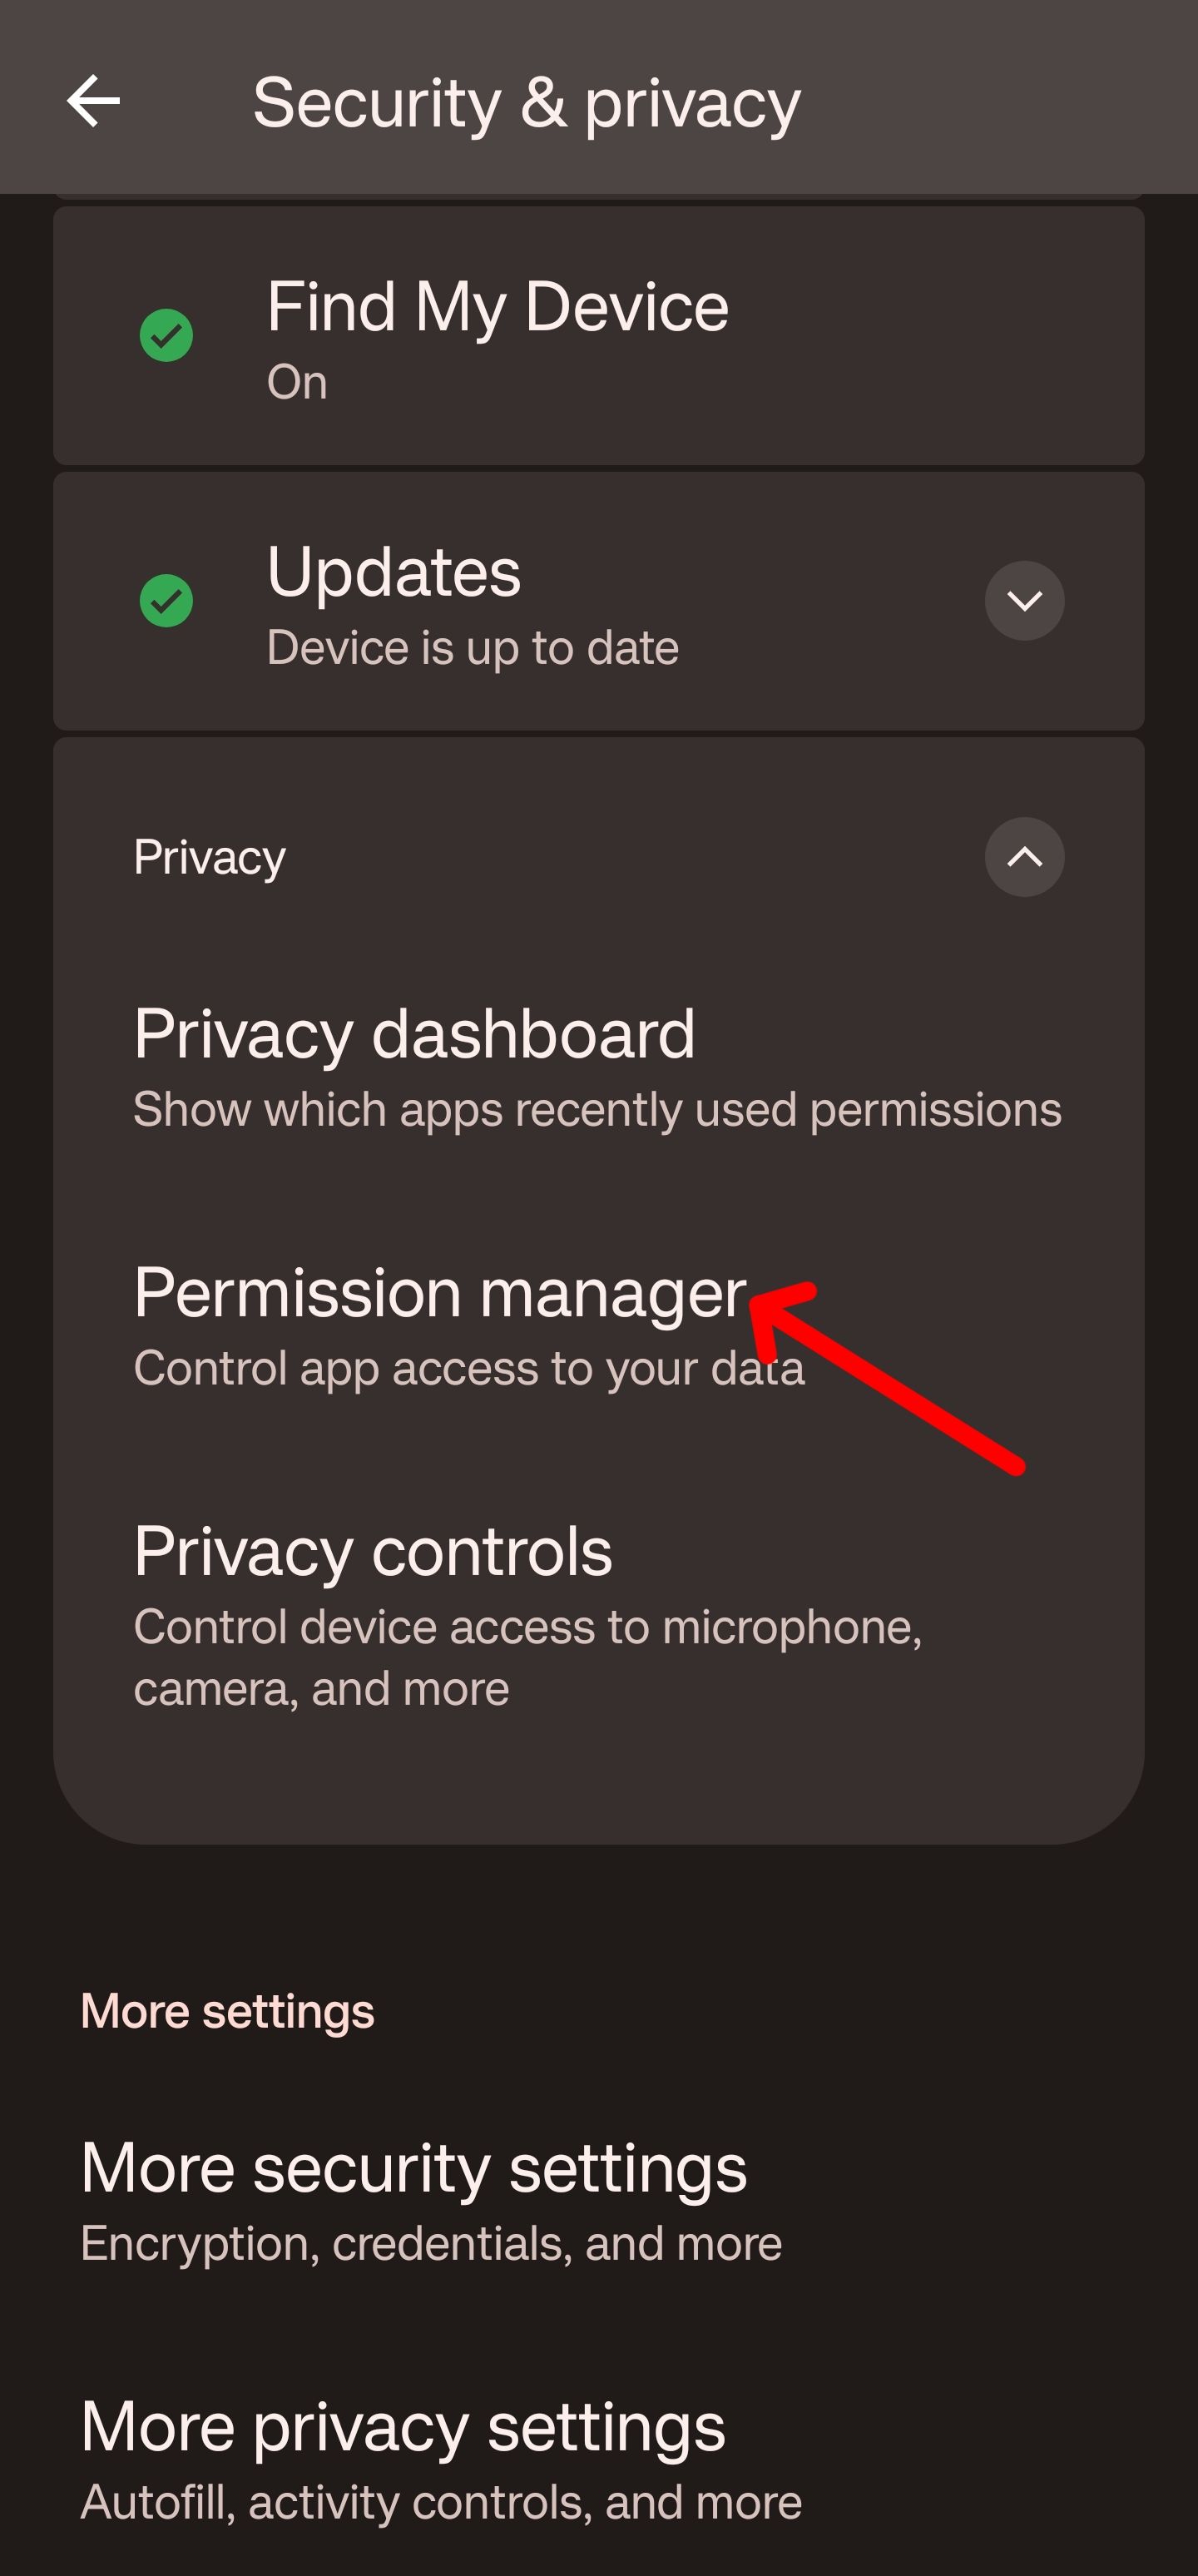 Tap the permission manager tab to access its settings.